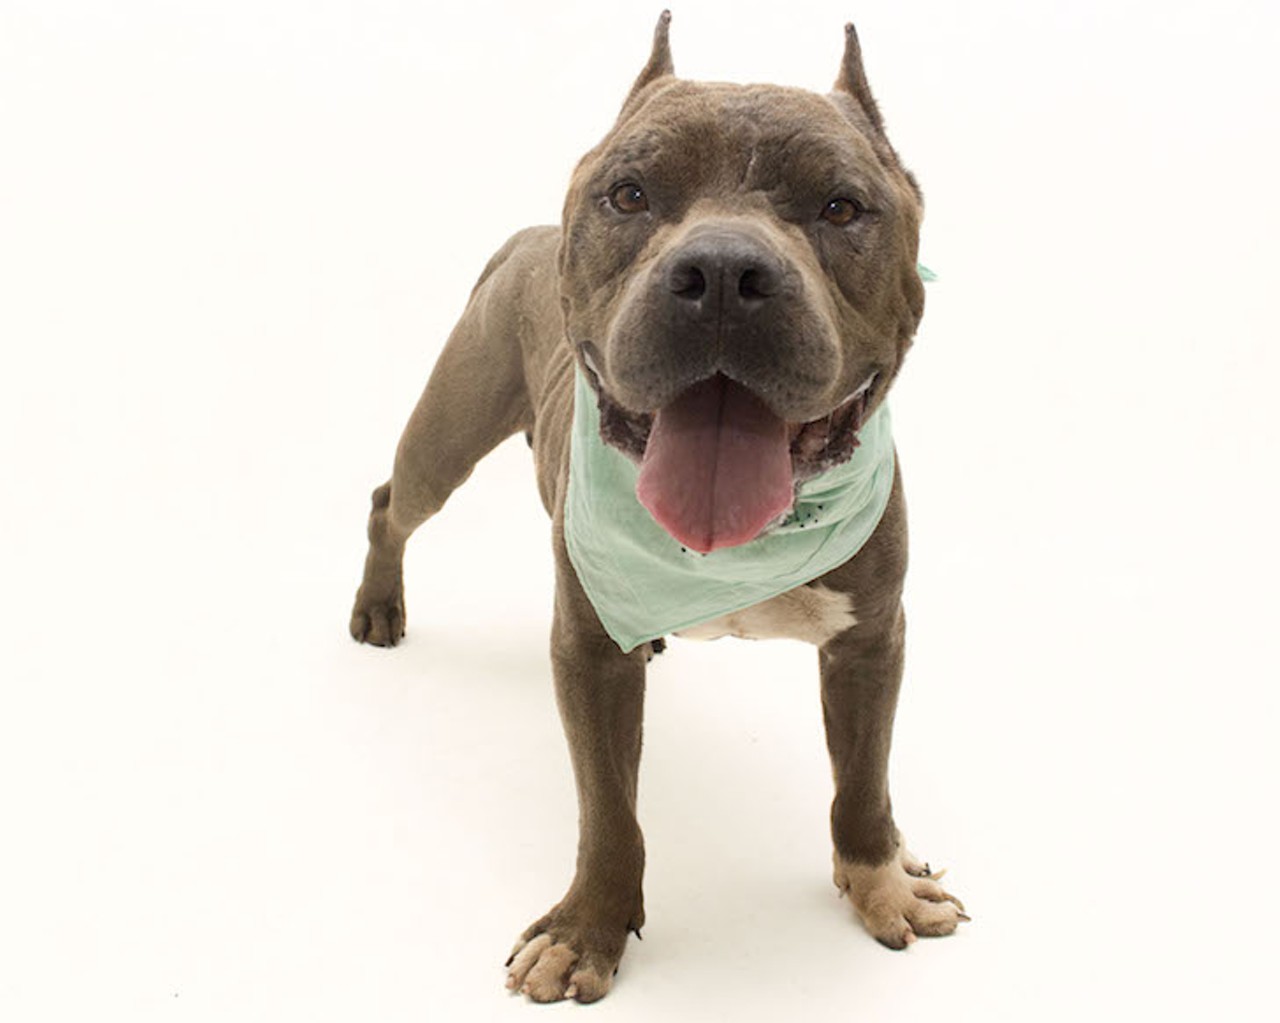 30 adoptable dogs available right now at Orange County Animal Services